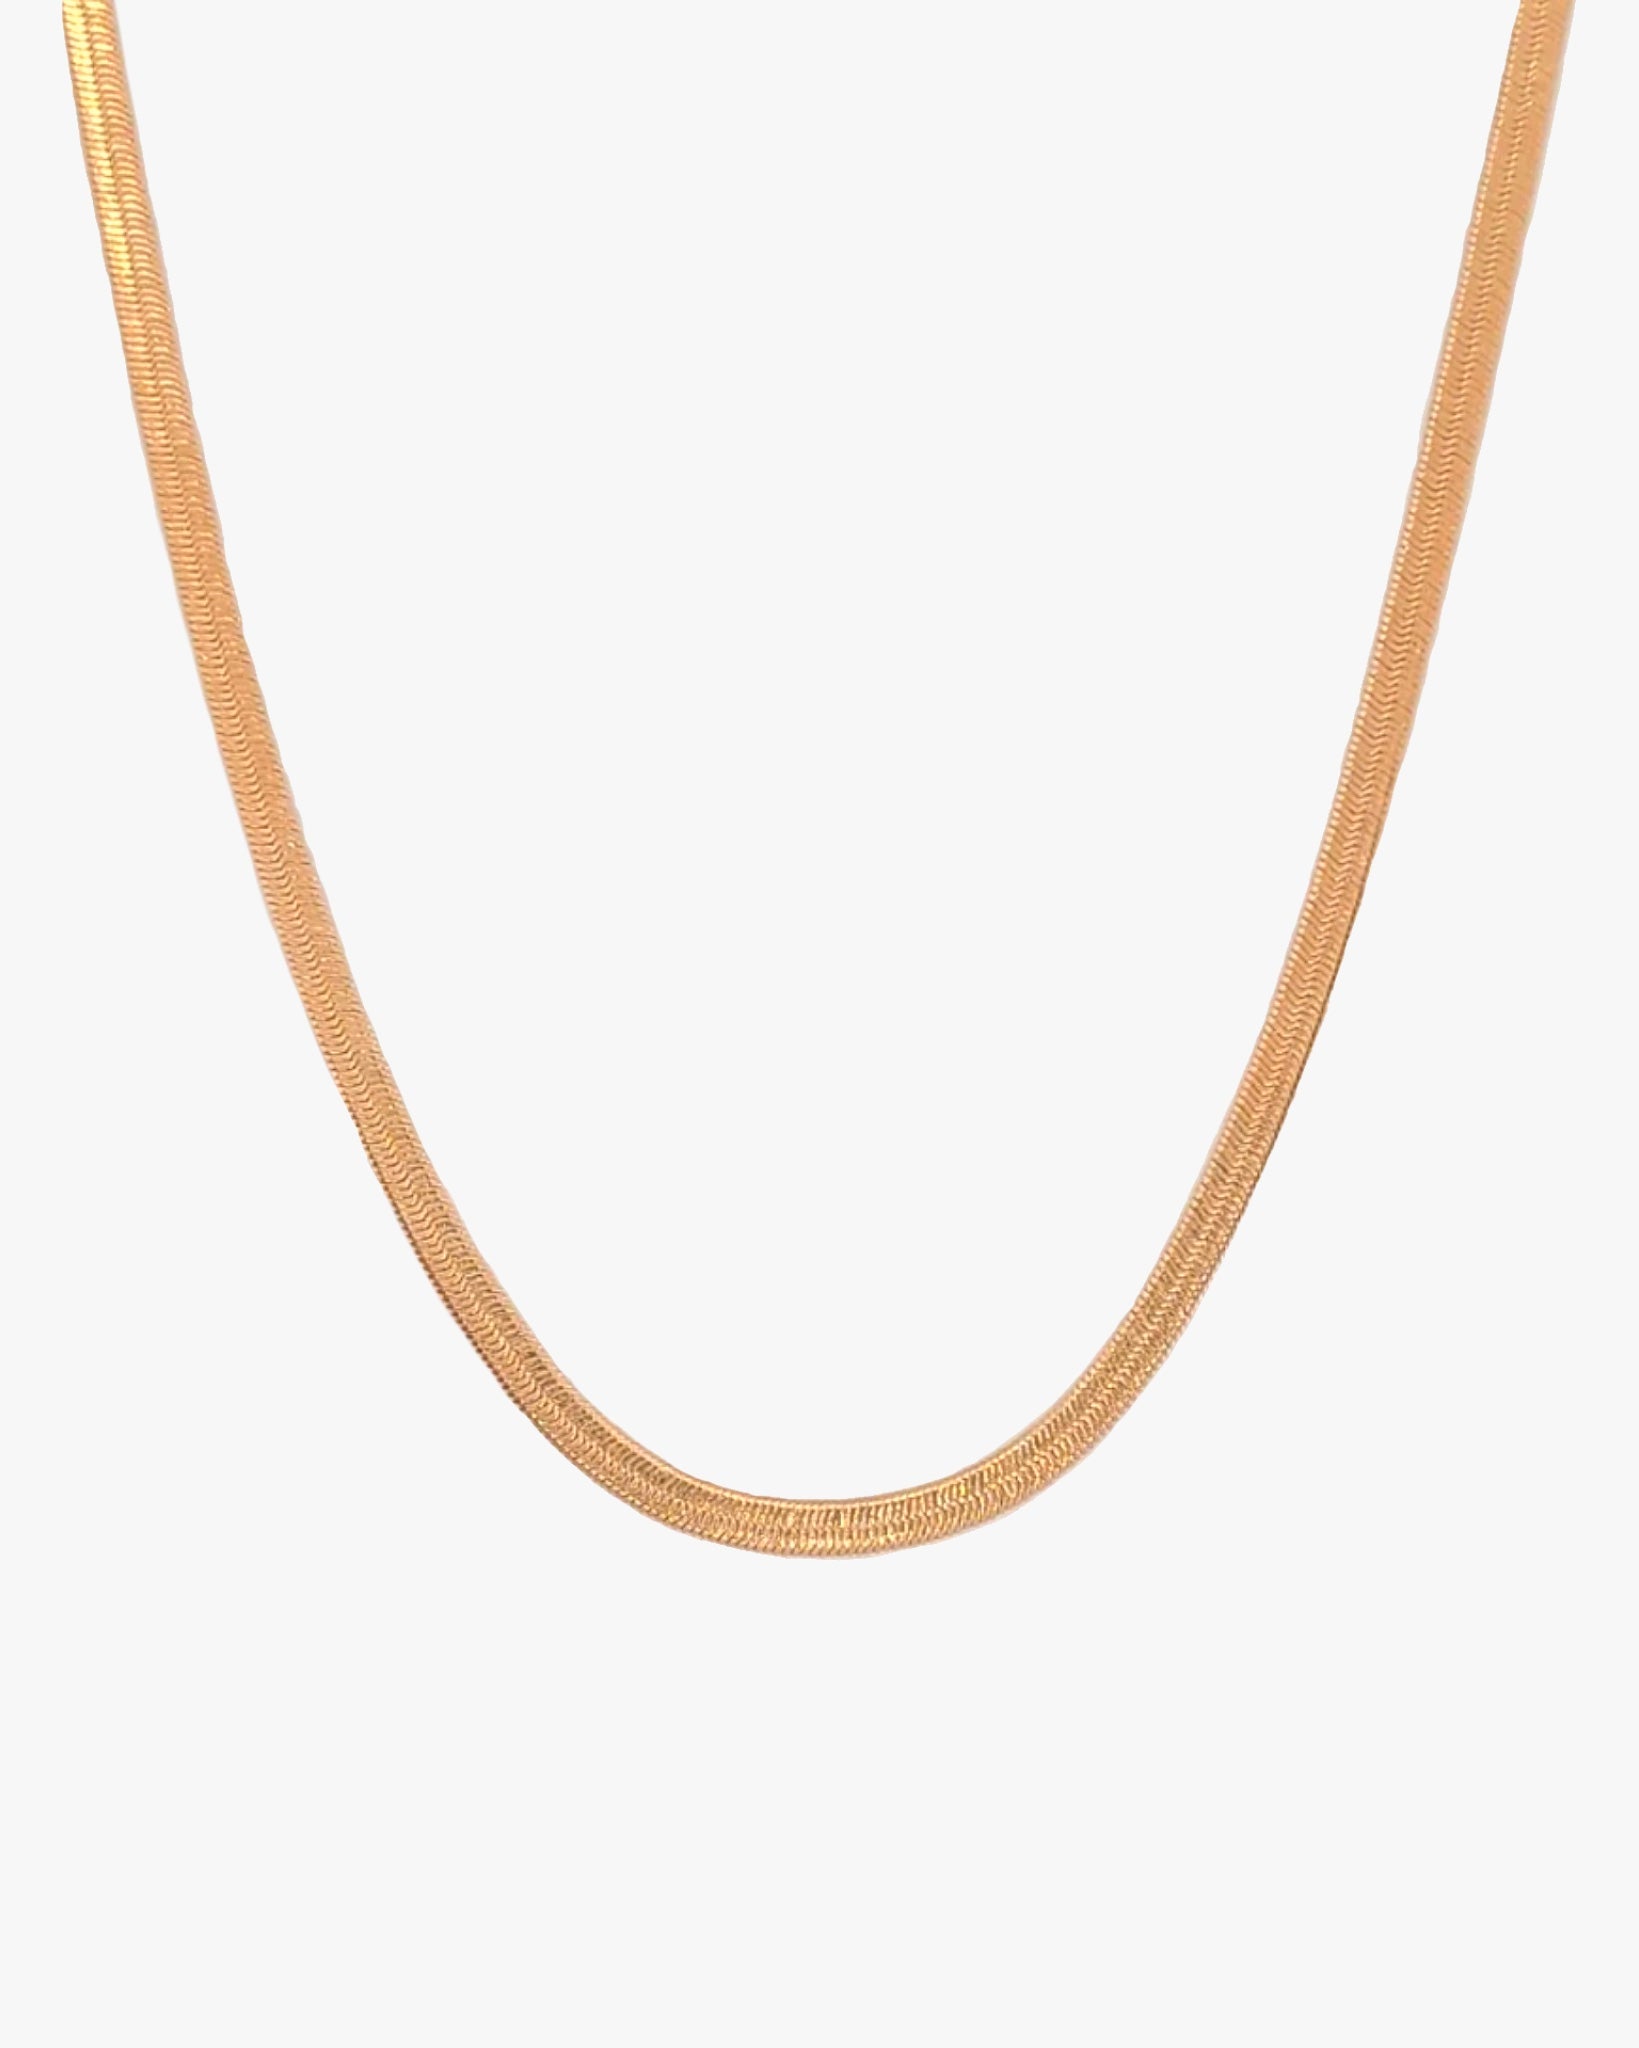 18K Gold Filled Herringbone Chain Necklaces. Snake Chain Necklaces